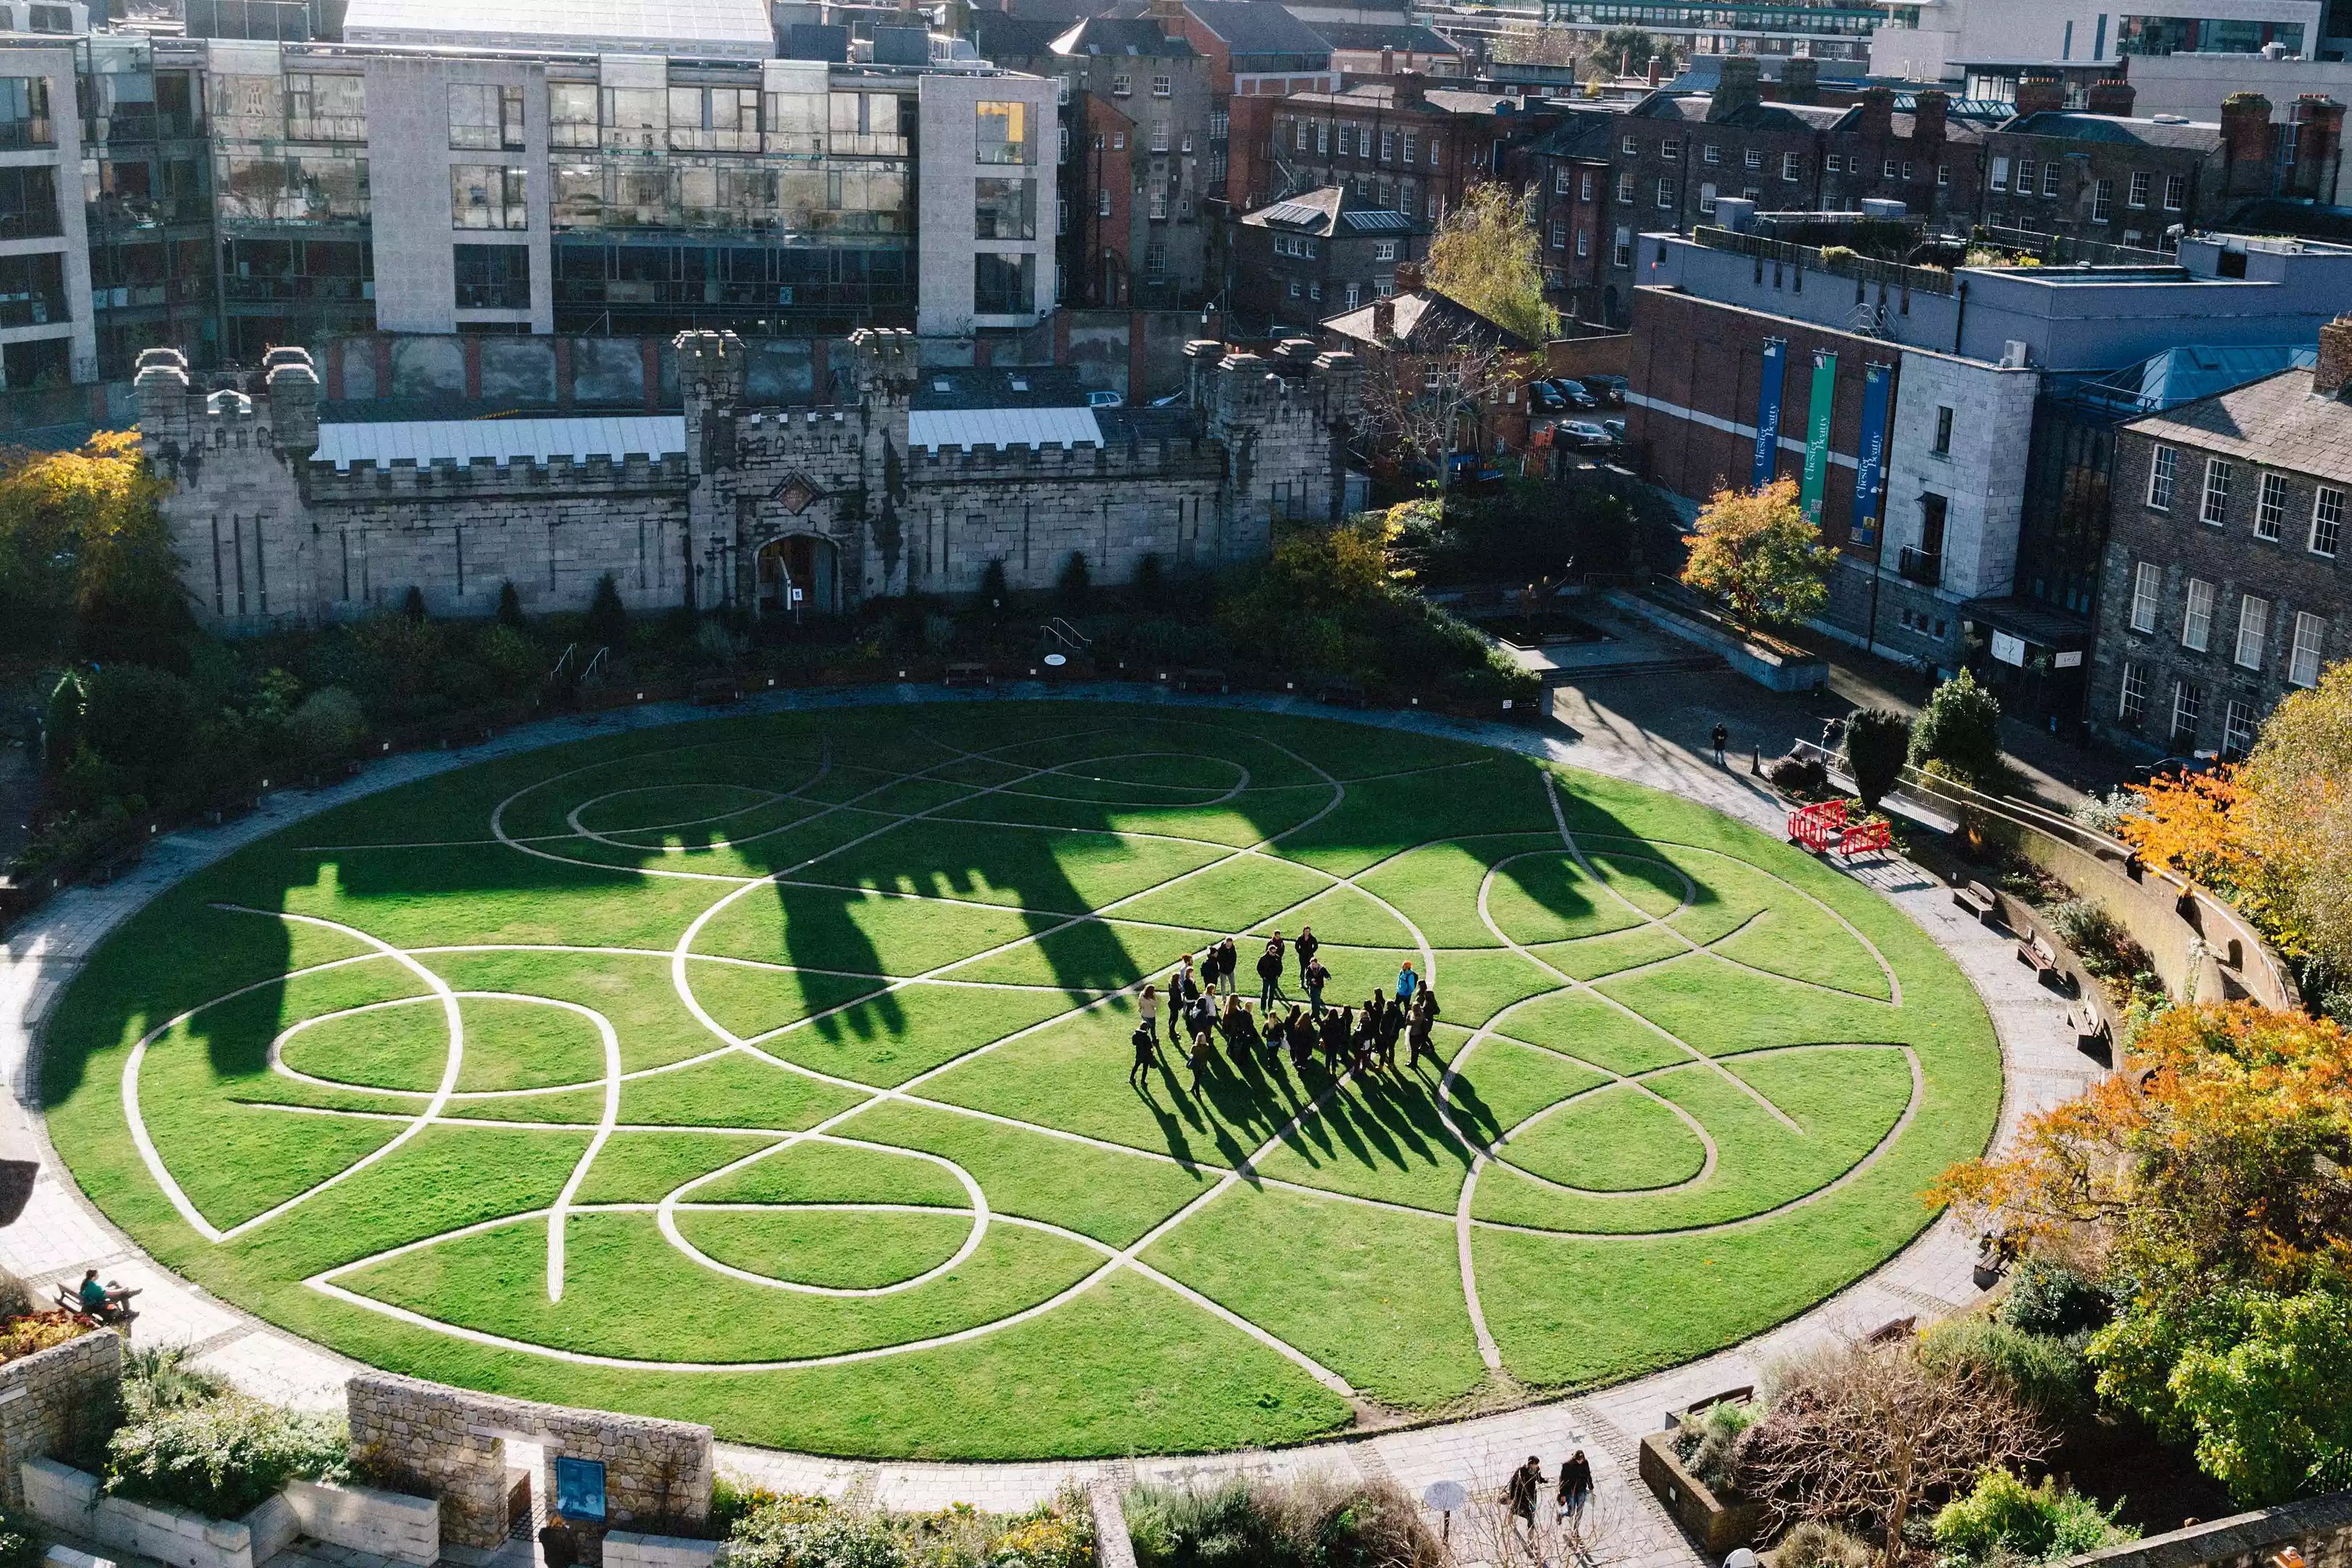 An overhead shot of a green lawn with a Celtic-inspired pattern of walkways